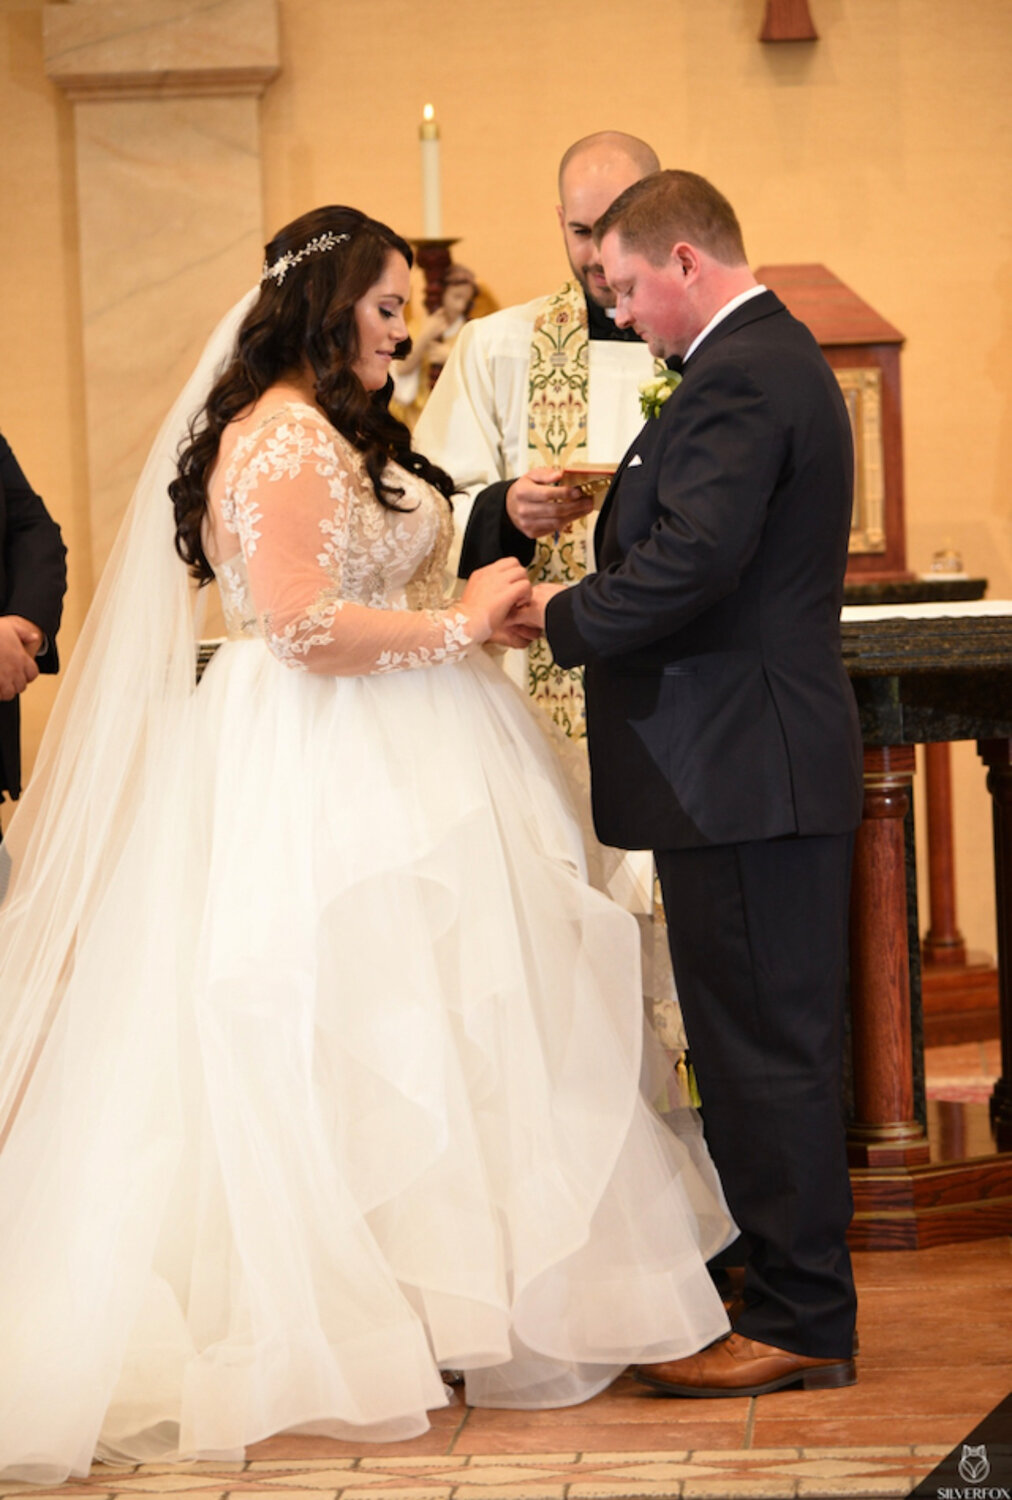 John and Danielle Garren held their dream wedding ceremony at Christ the King Church in October 2021.